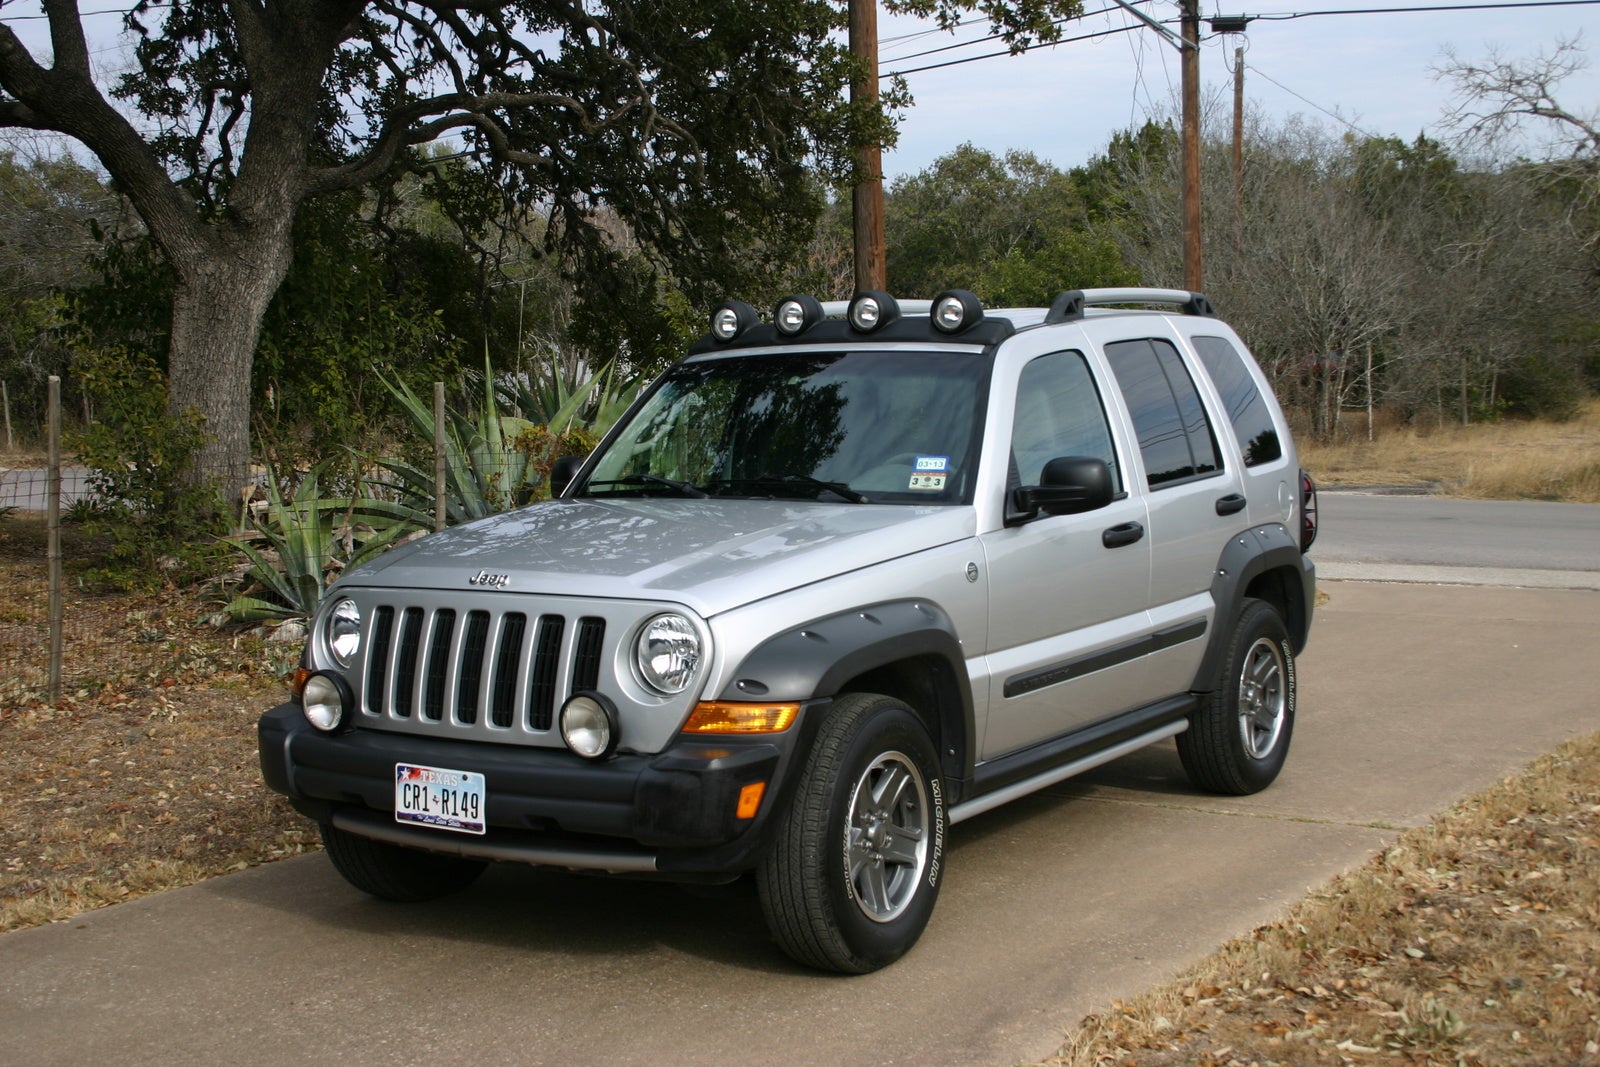 2006 Jeep Liberty Pictures CarGurus